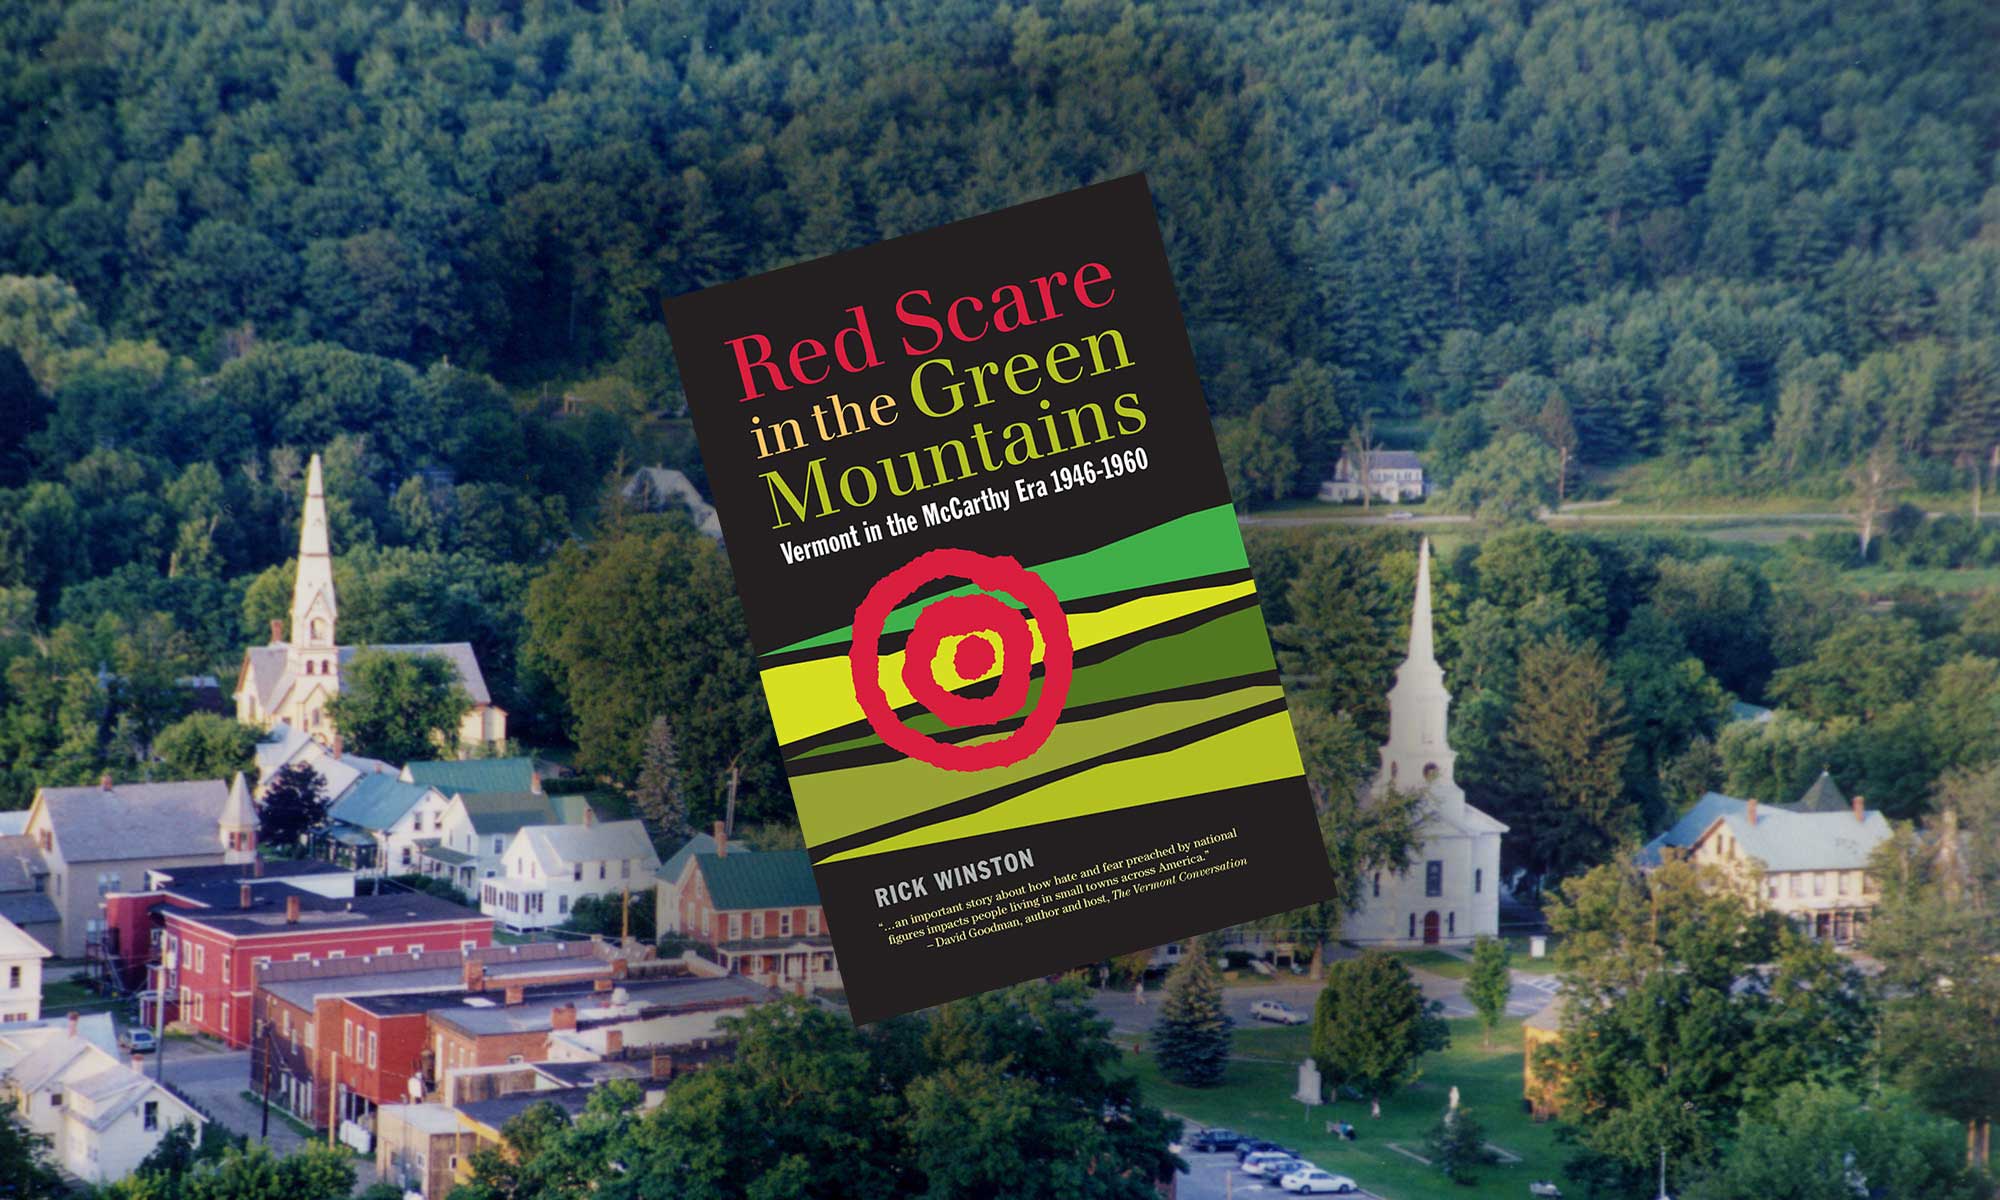 Red Scare in the Green Mountains